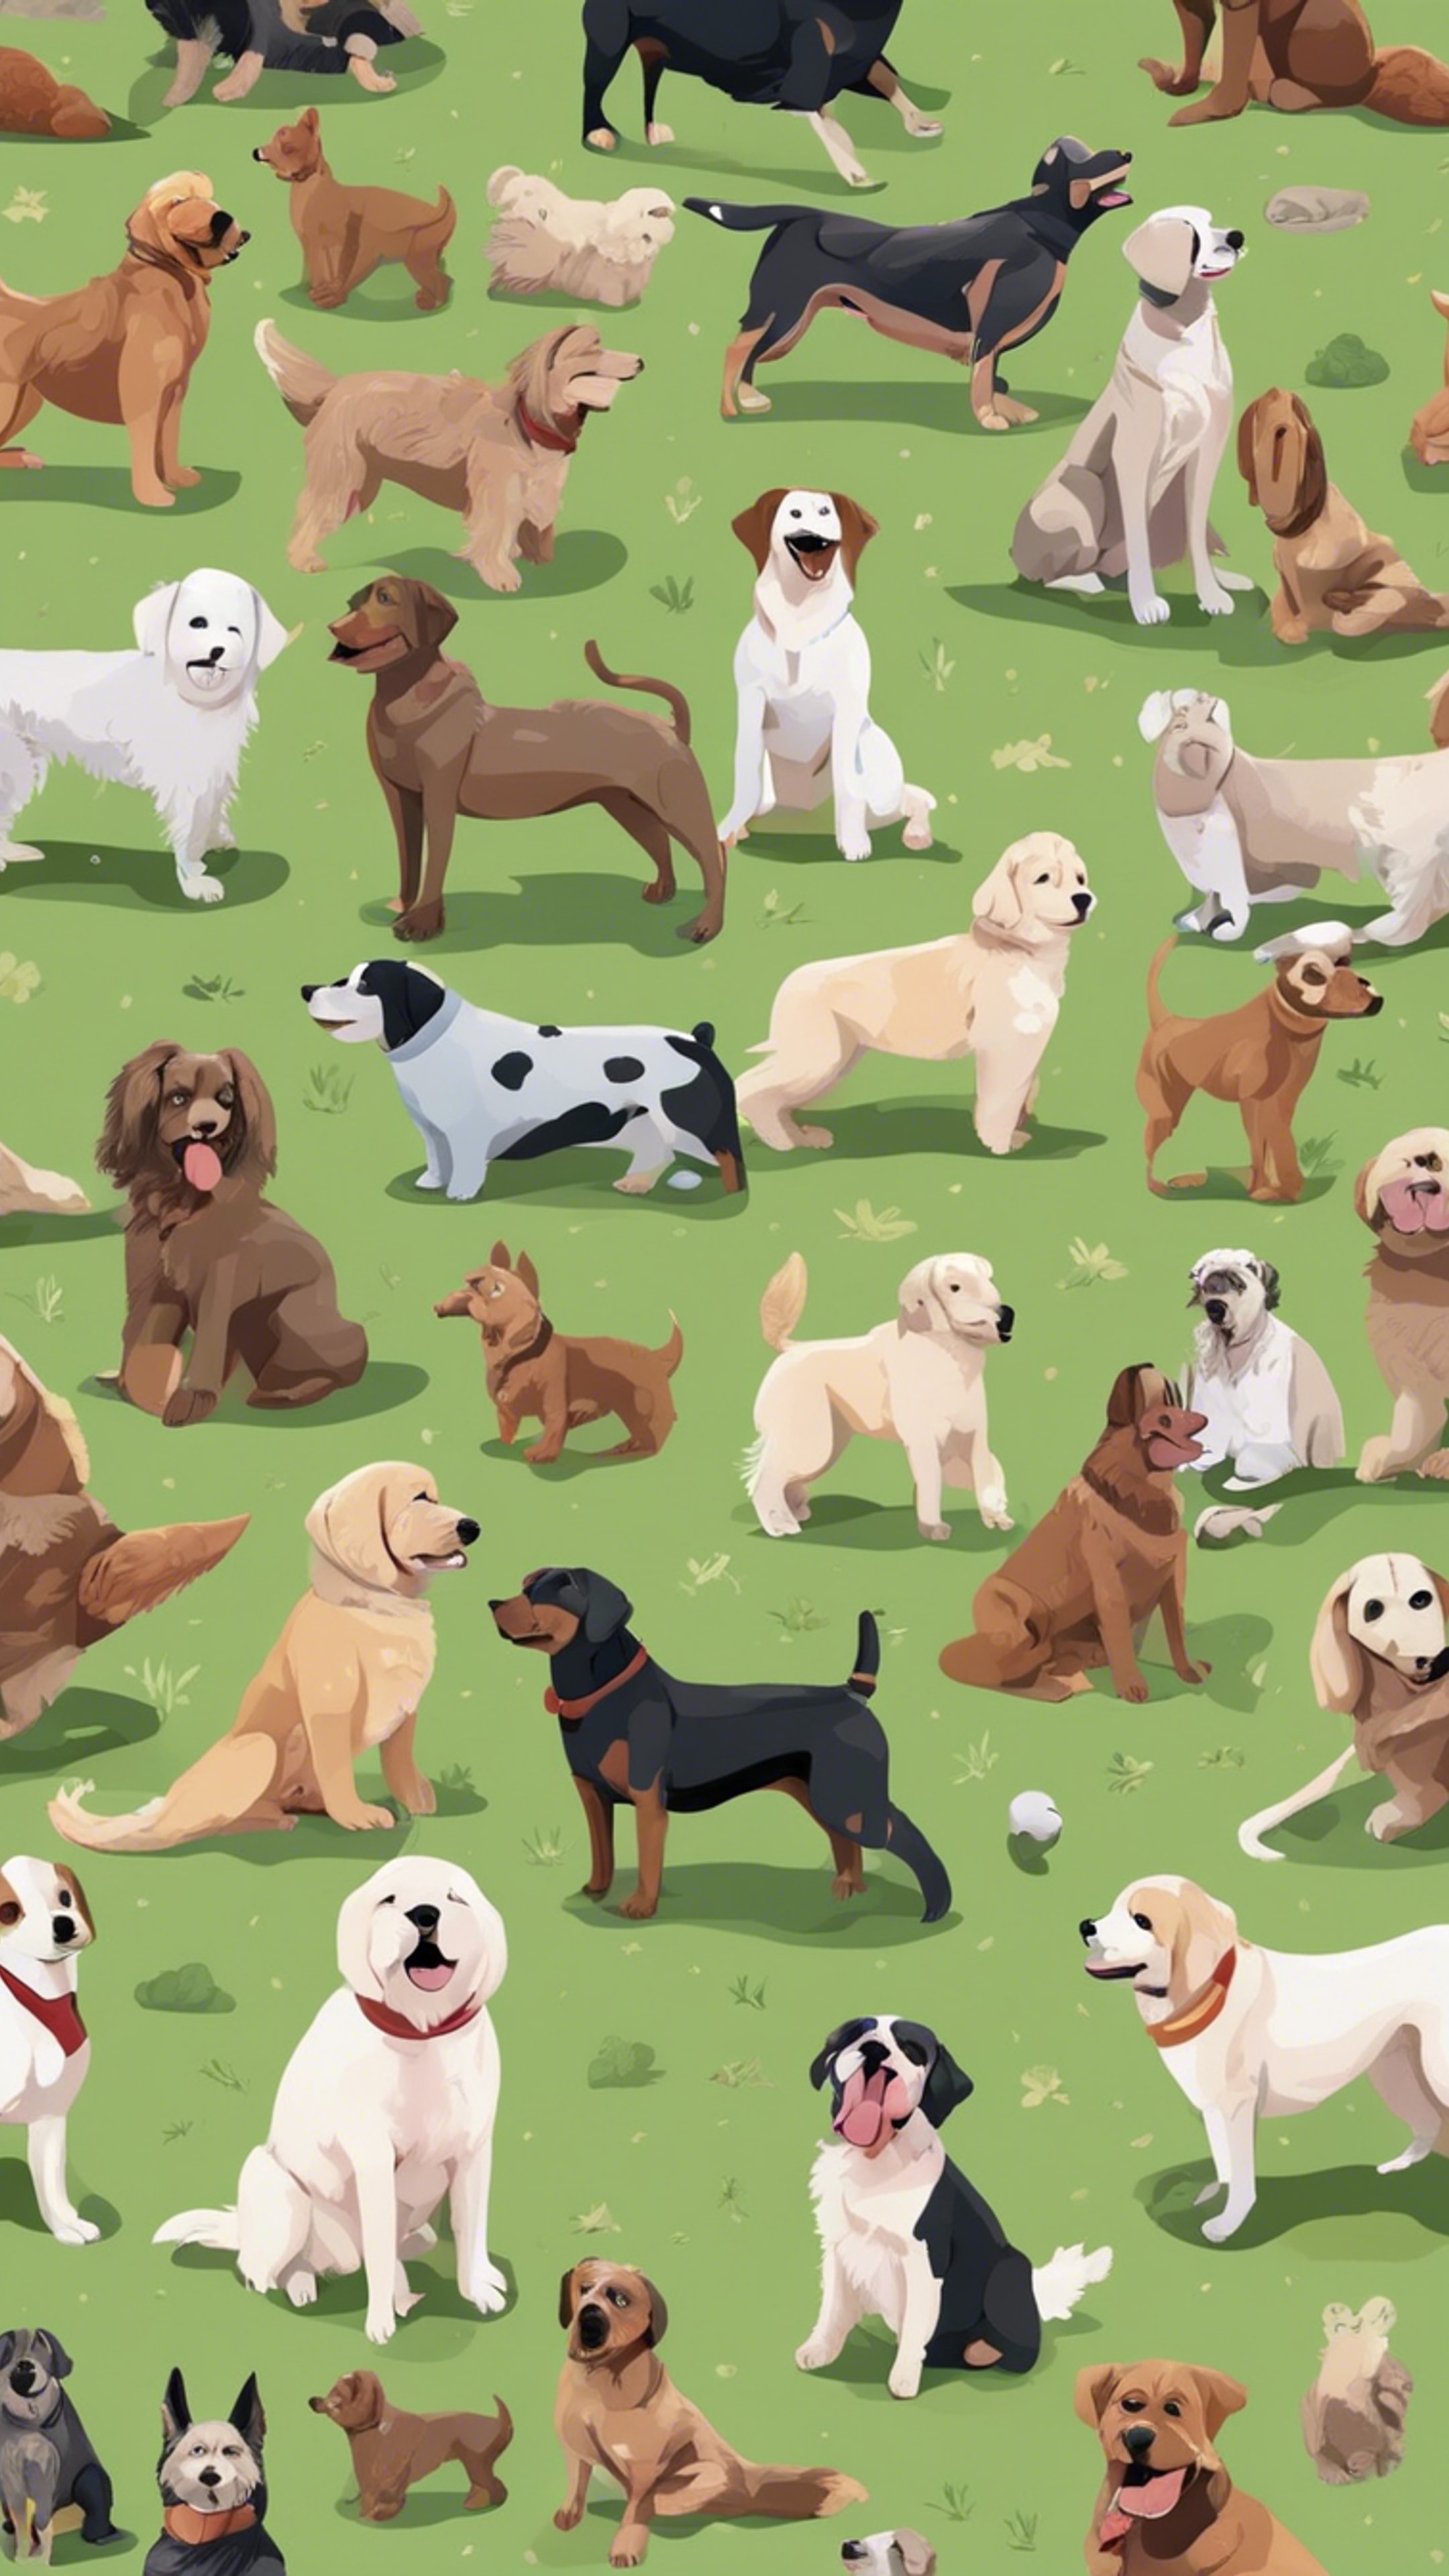 Seamless pattern of various breed of dogs playing in a park. 墙纸[140058c252ce4edb8a7a]